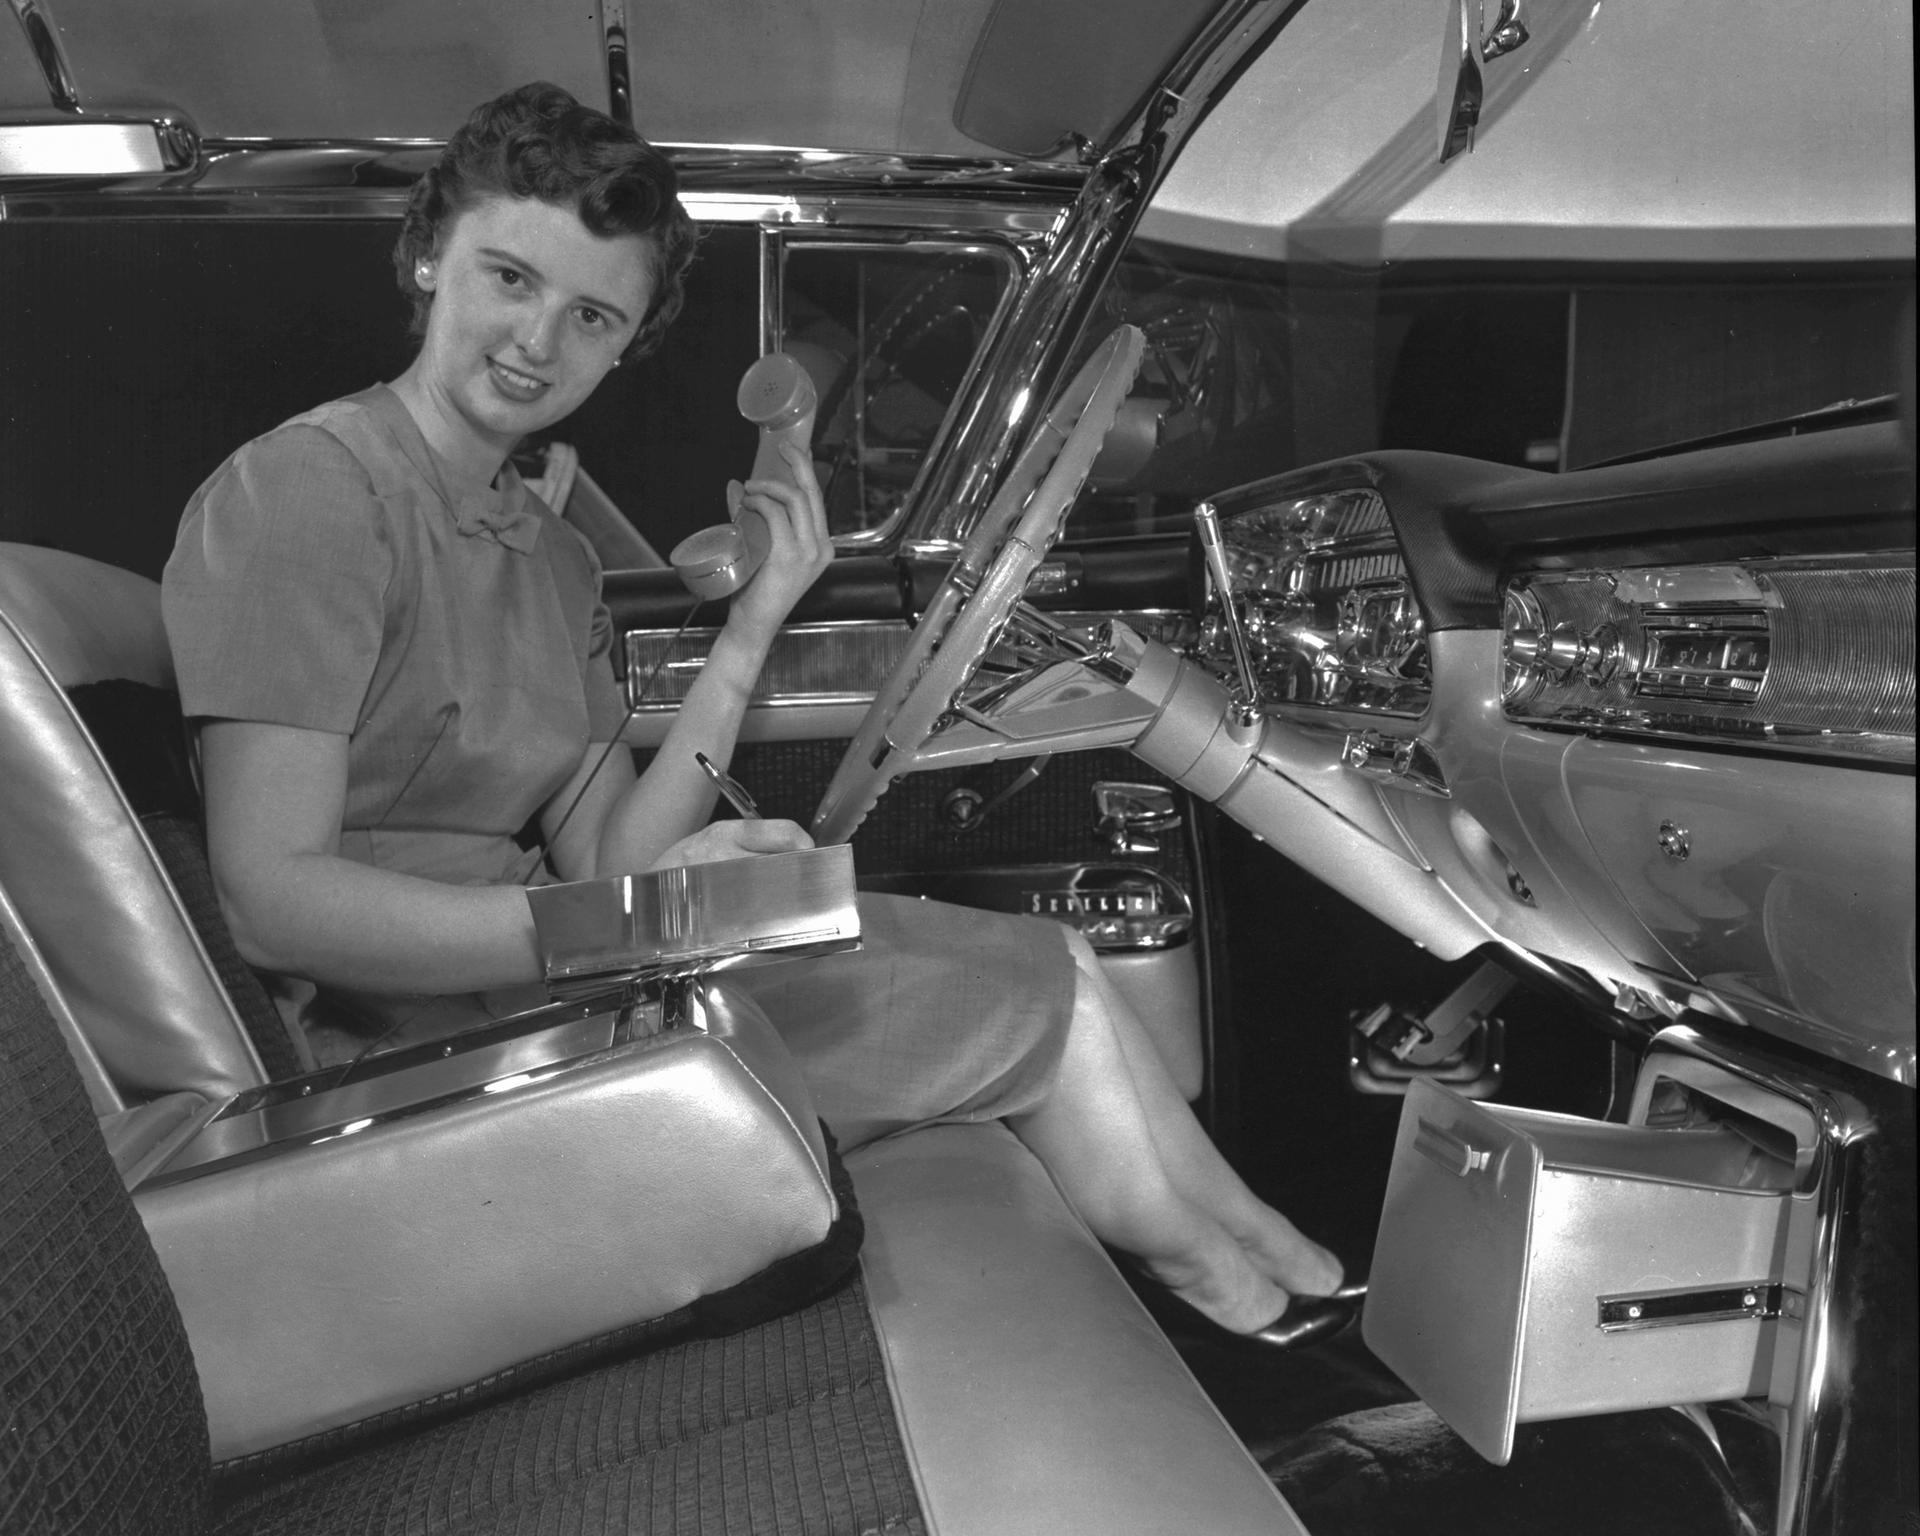 Suzanne Vanderbilt demonstrating an early car phone and built-in memo pad — custom features for her 1958 exhibition-model Cadillac Eldorado Seville.